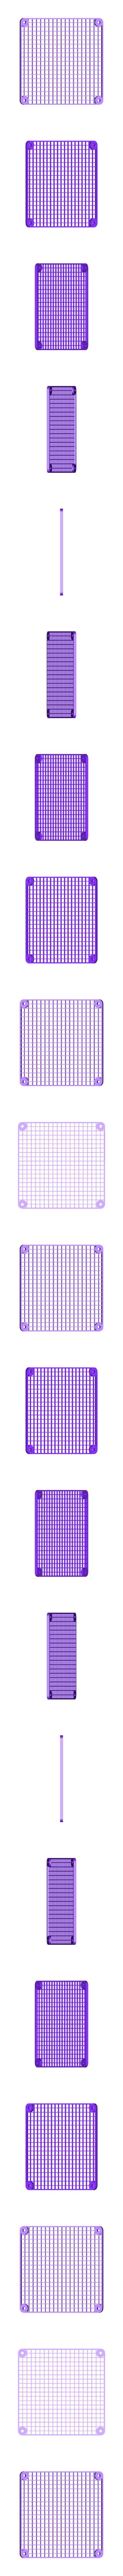 140mm_grid_reduced_fan_cover.stl Download free STL file Customizable Fan Grill Cover • 3D print design, MightyNozzle